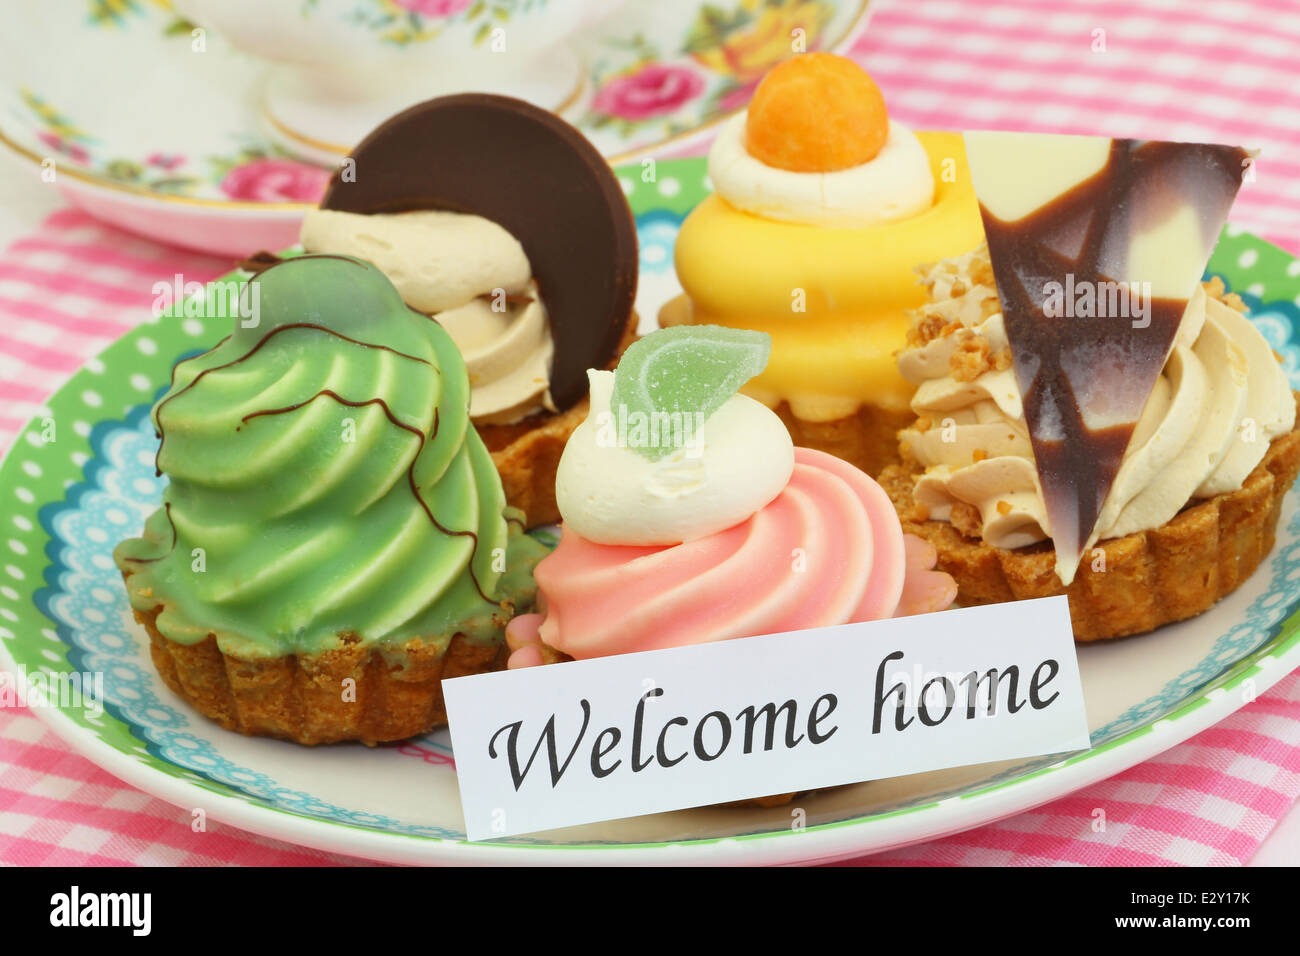 Welcome card with colorful cream cakes Stock Photo